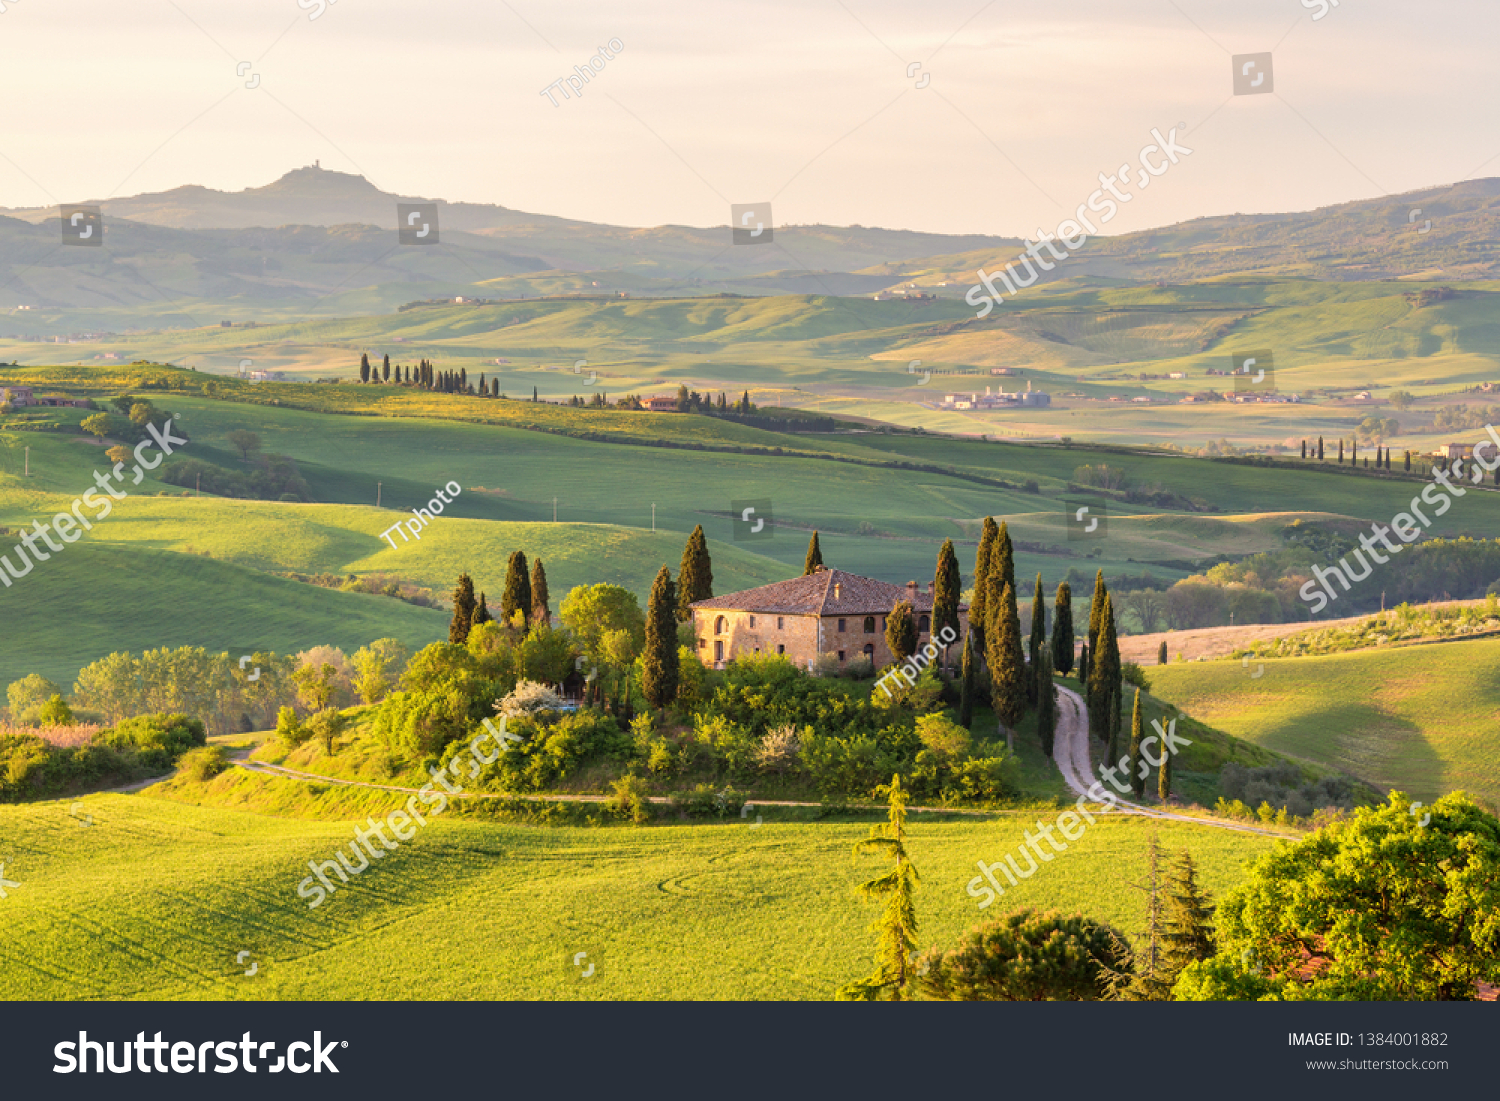 Farm house on a hill in Tuscany landscape #1384001882